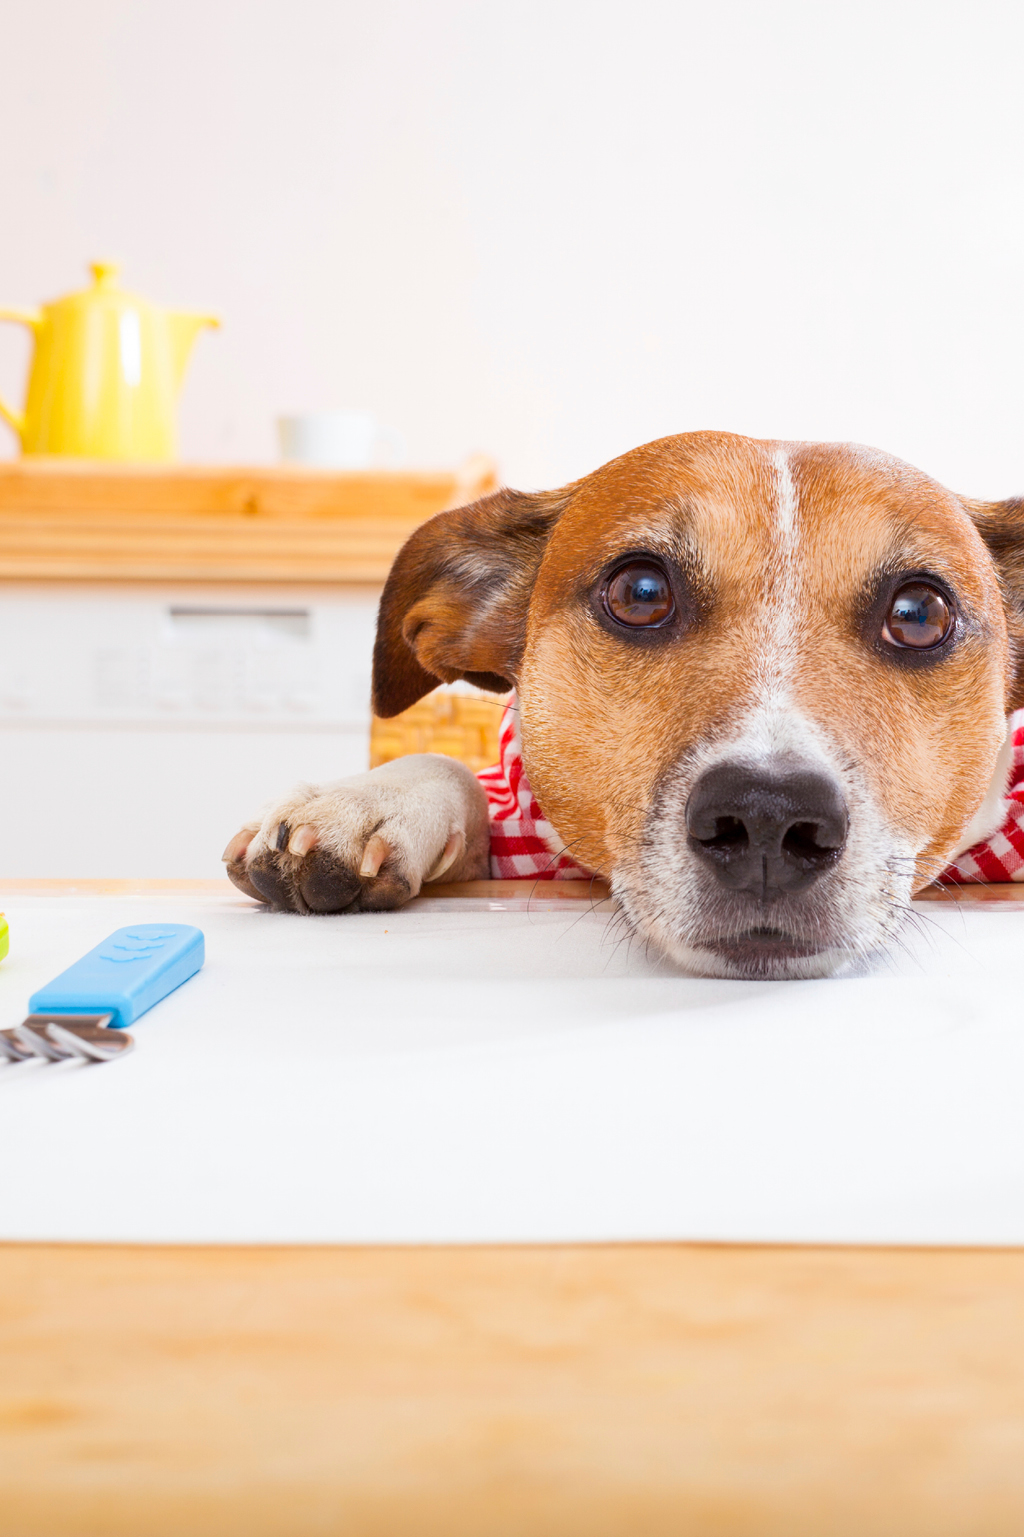 Table Foods That Are Bad For Pets